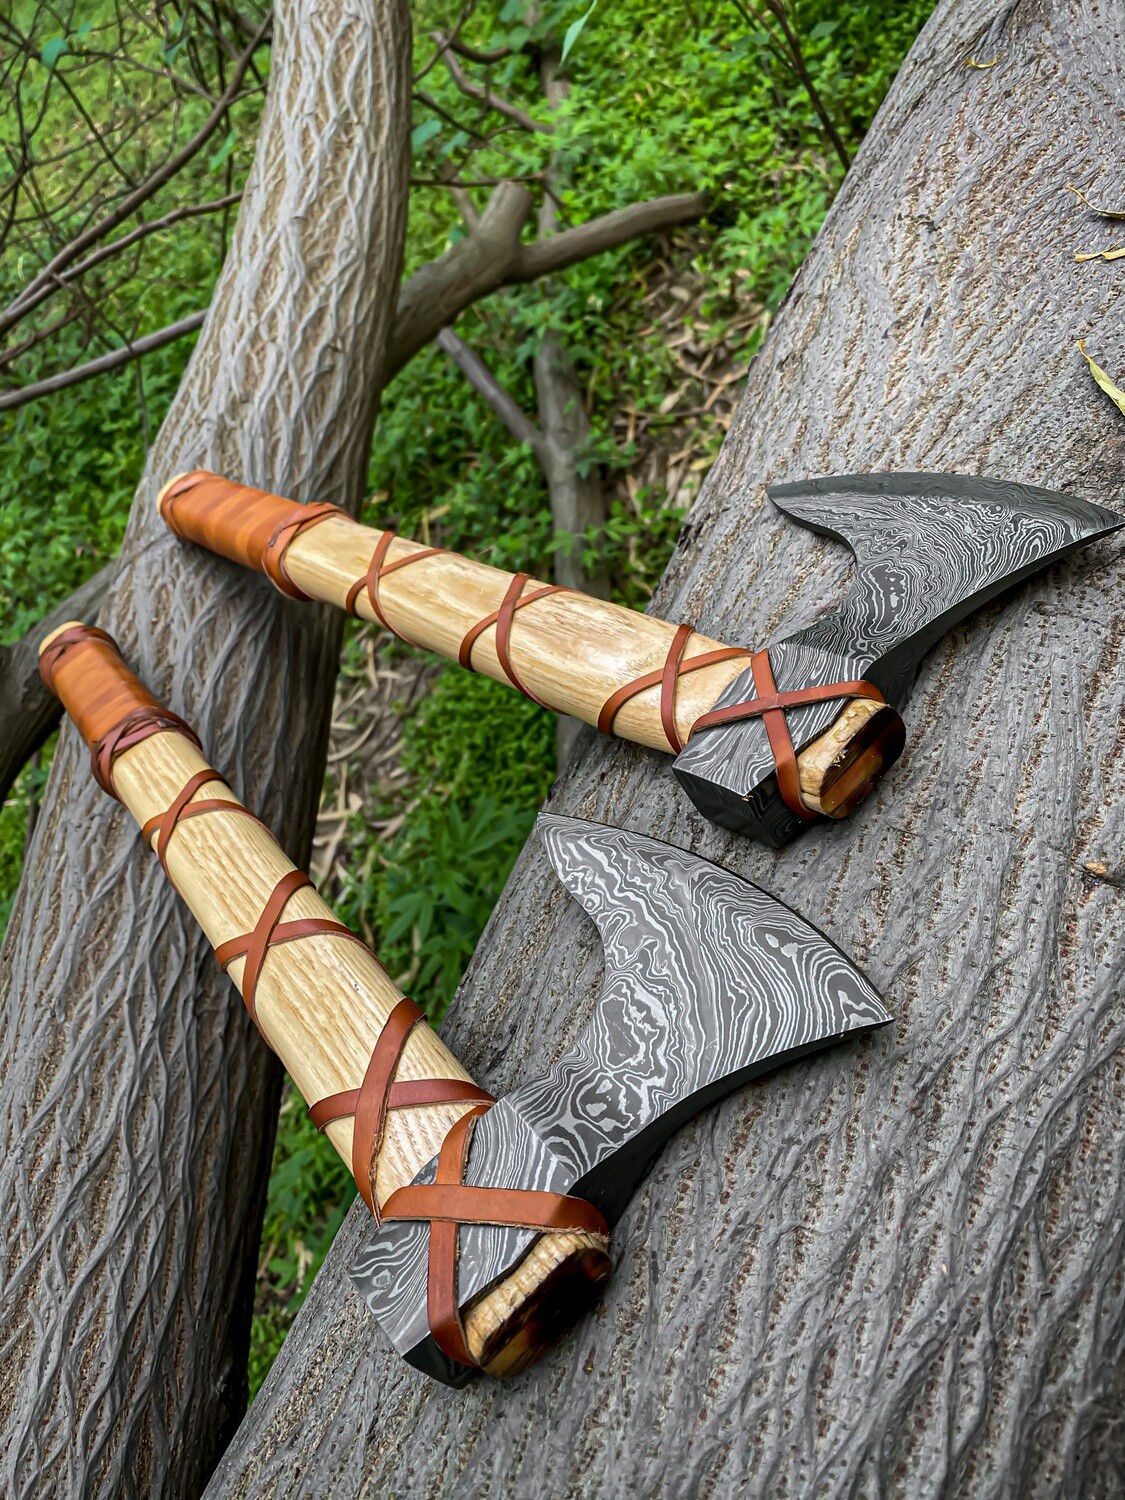 Damascus Viking Axe Pair With Ashwood Handle, Leather Wrap And Leather Sheath